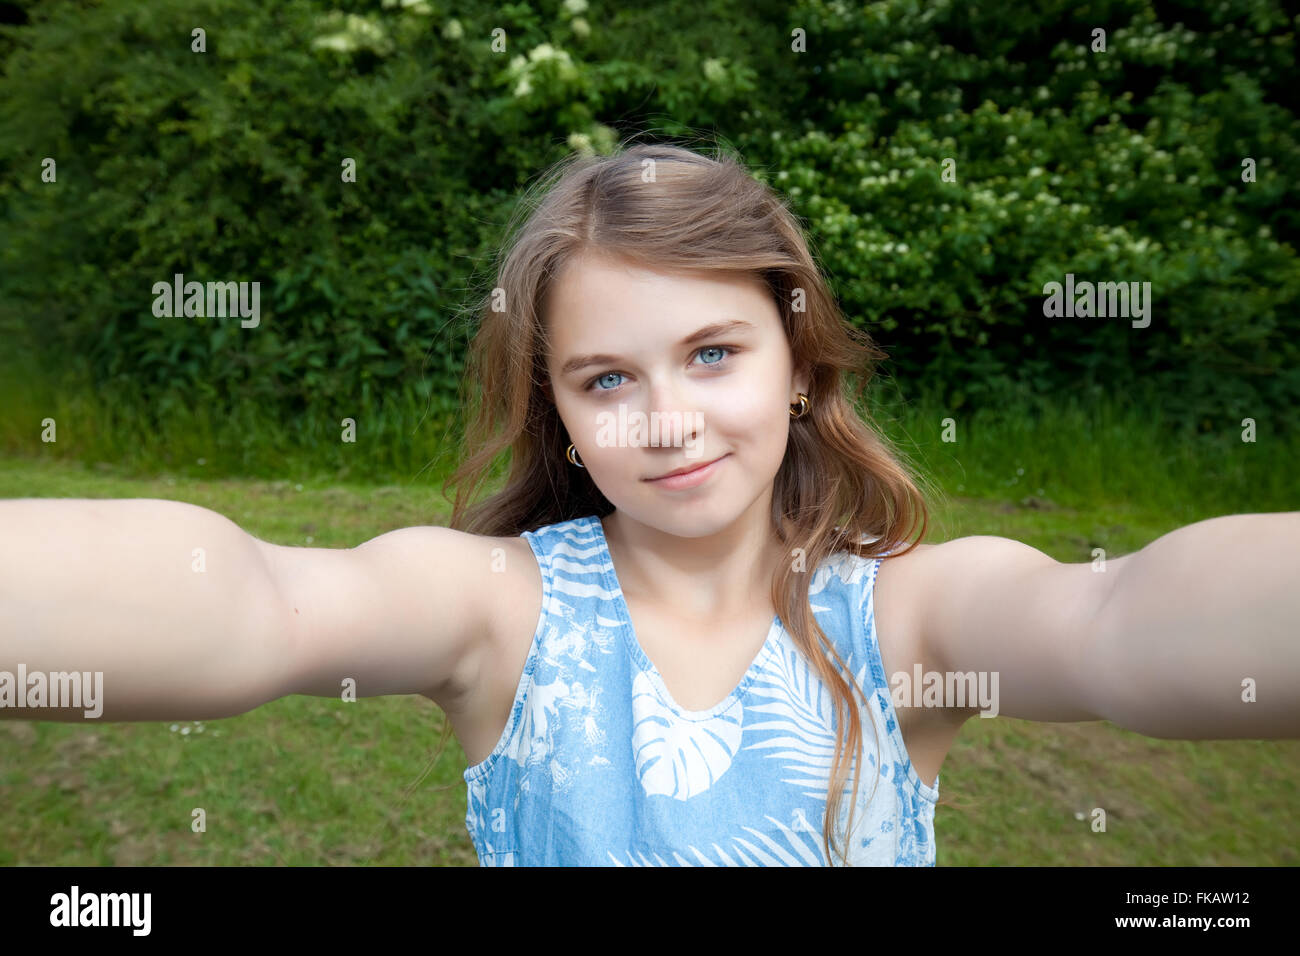 young girl making selfie photo in park Stock Photo